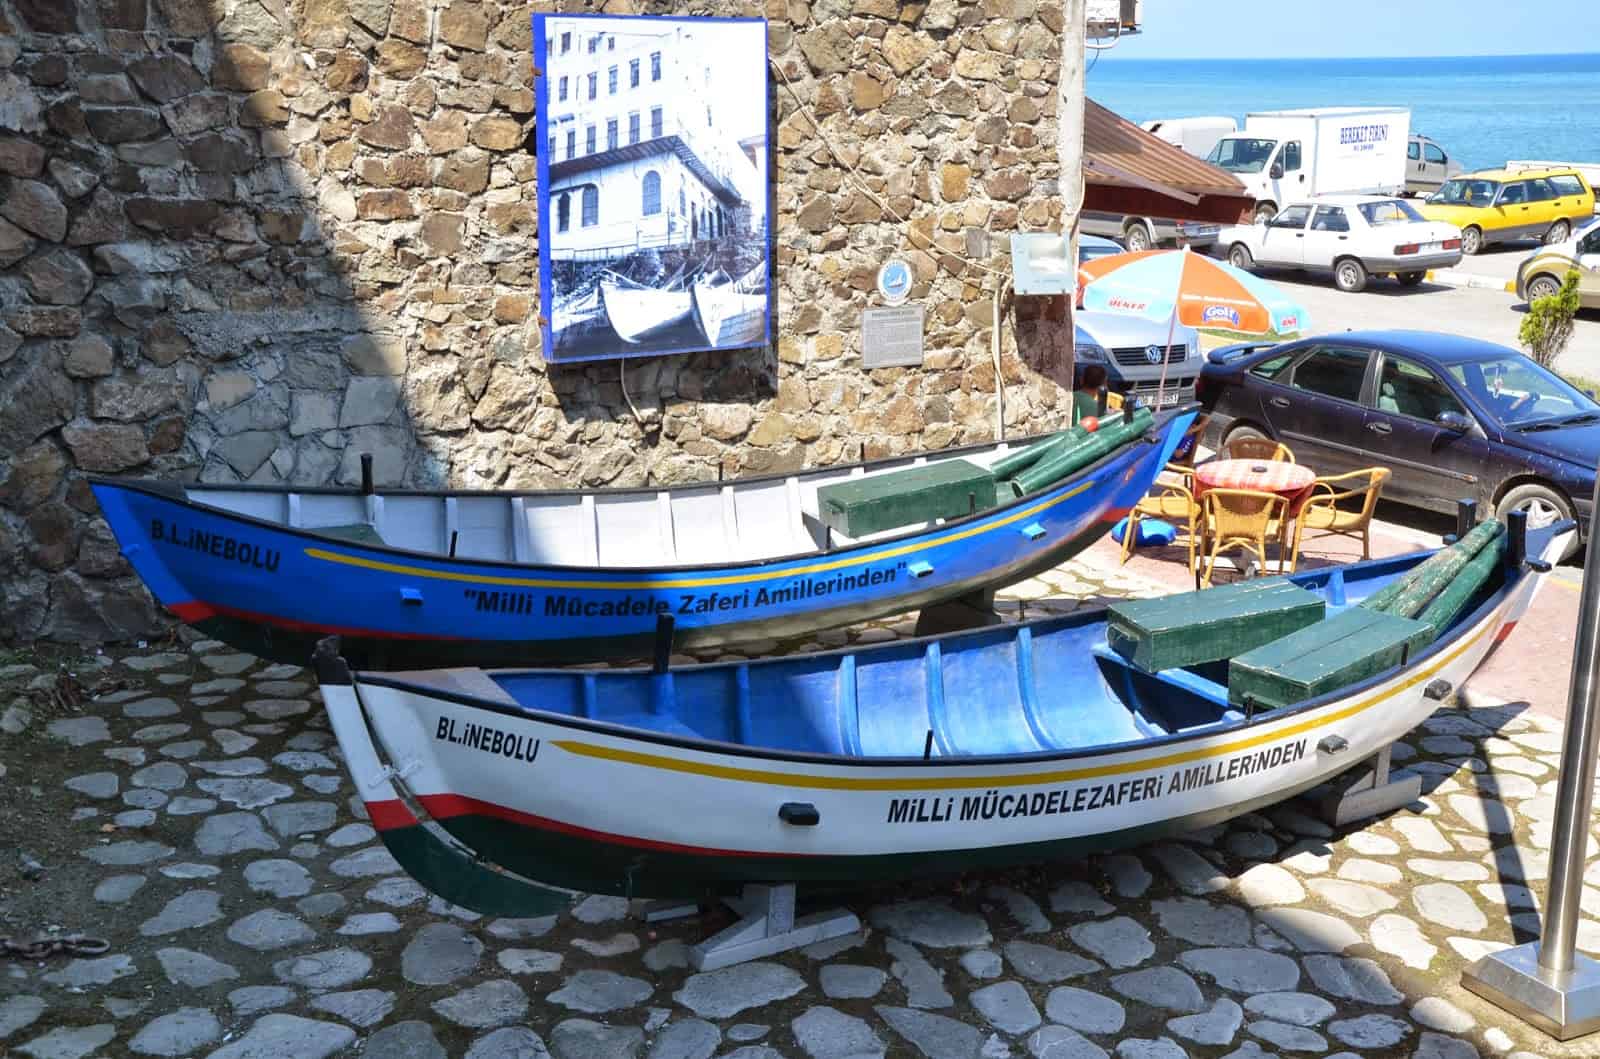 Boats used to smuggle weapons in İnebolu, Turkey